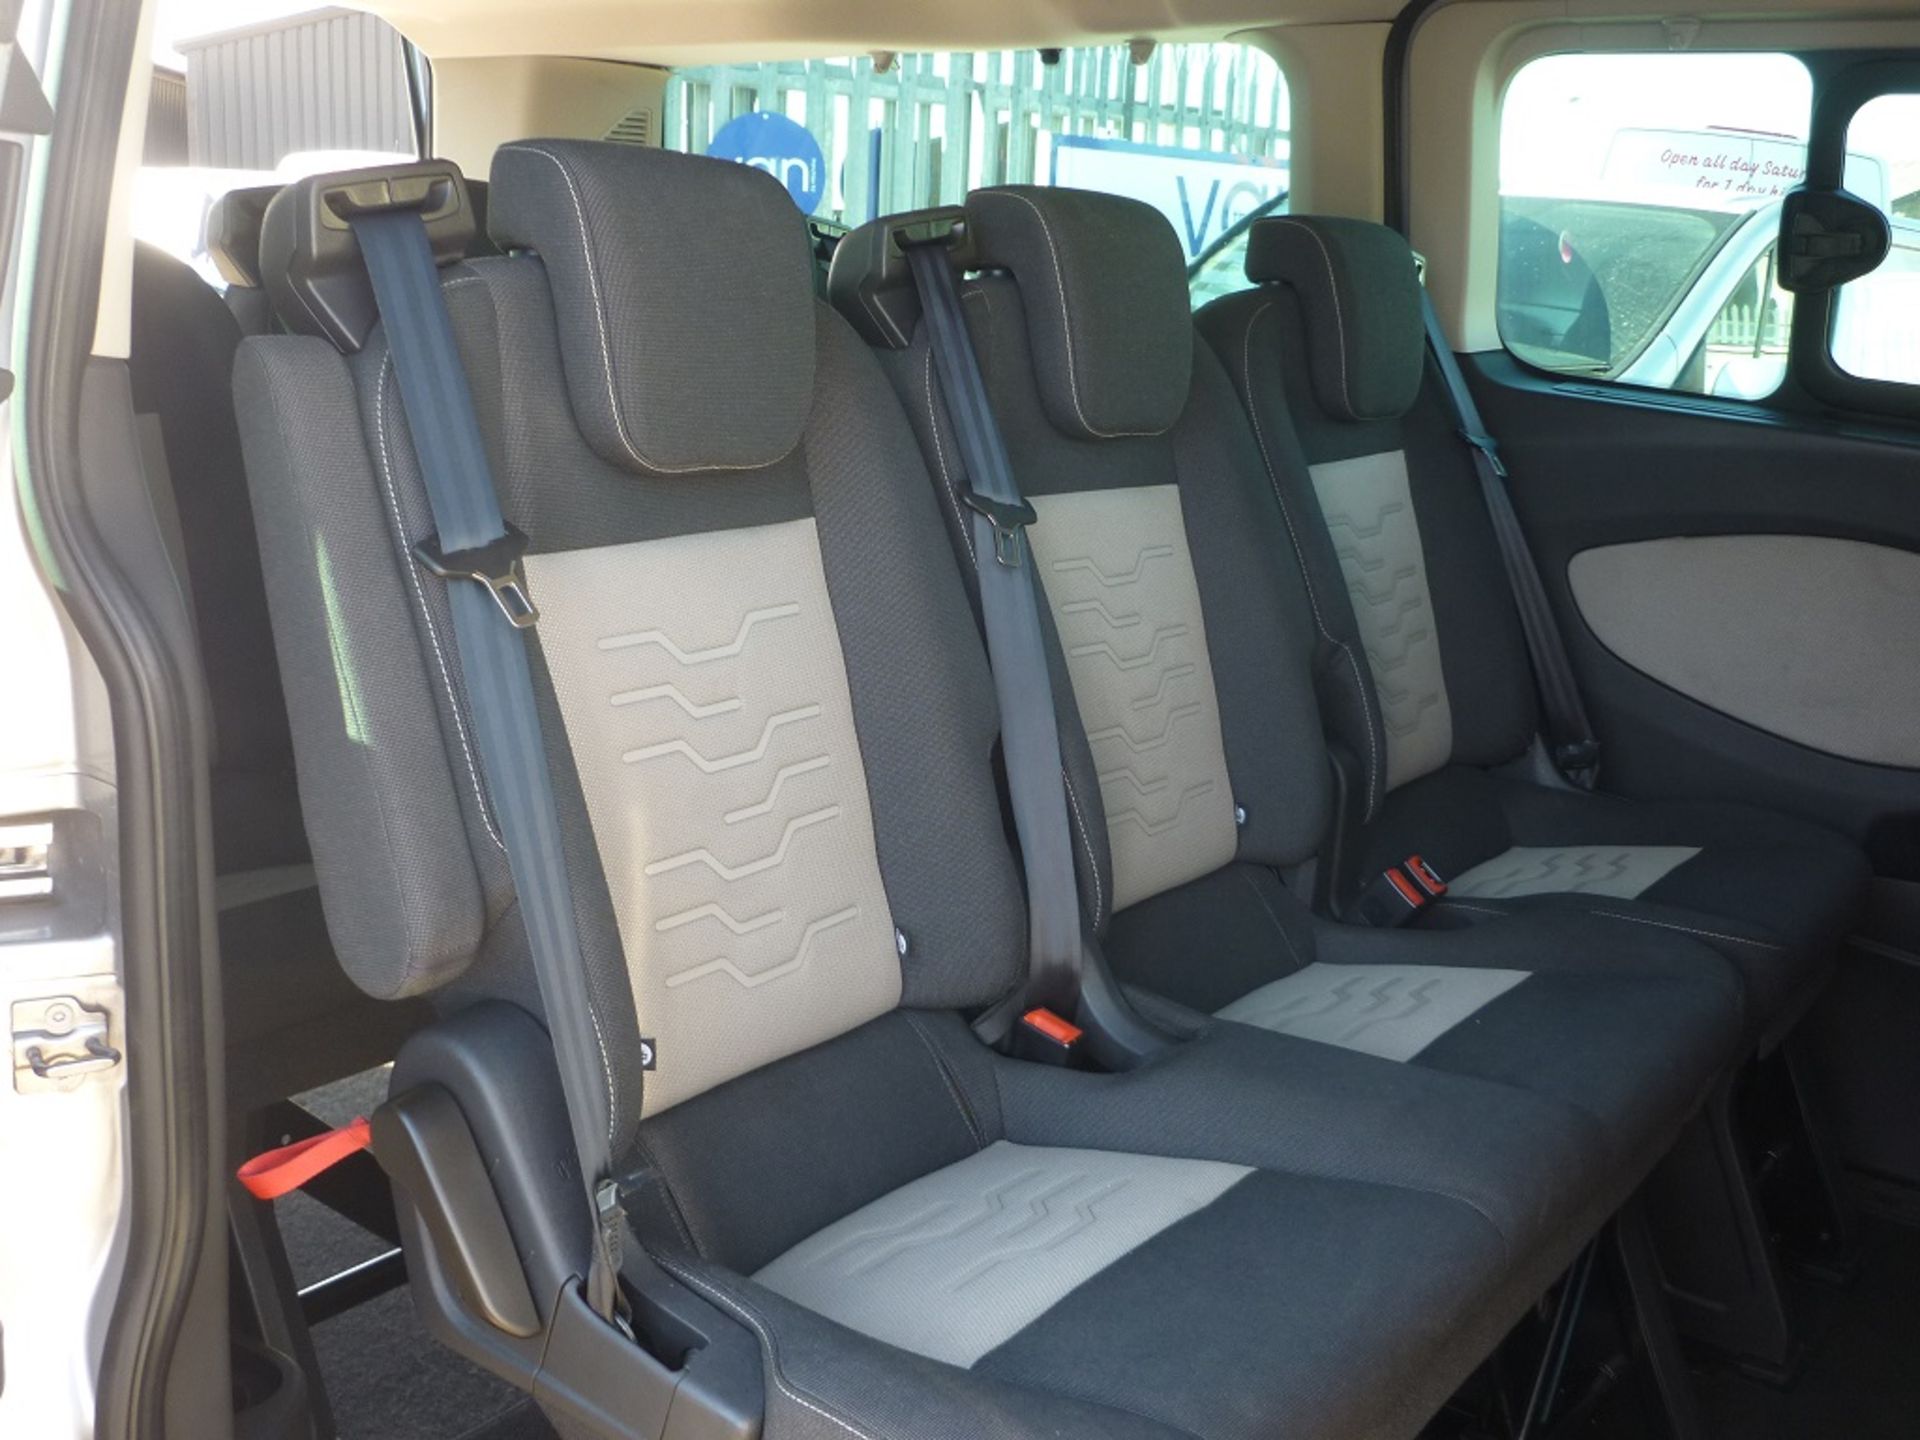 2015/15 REG FORD TOURNEO CUSTOM 300 LIMITED EDITION SILVER DIESEL MPV, SHOWING 0 FORMER KEEPERS - Image 7 of 8